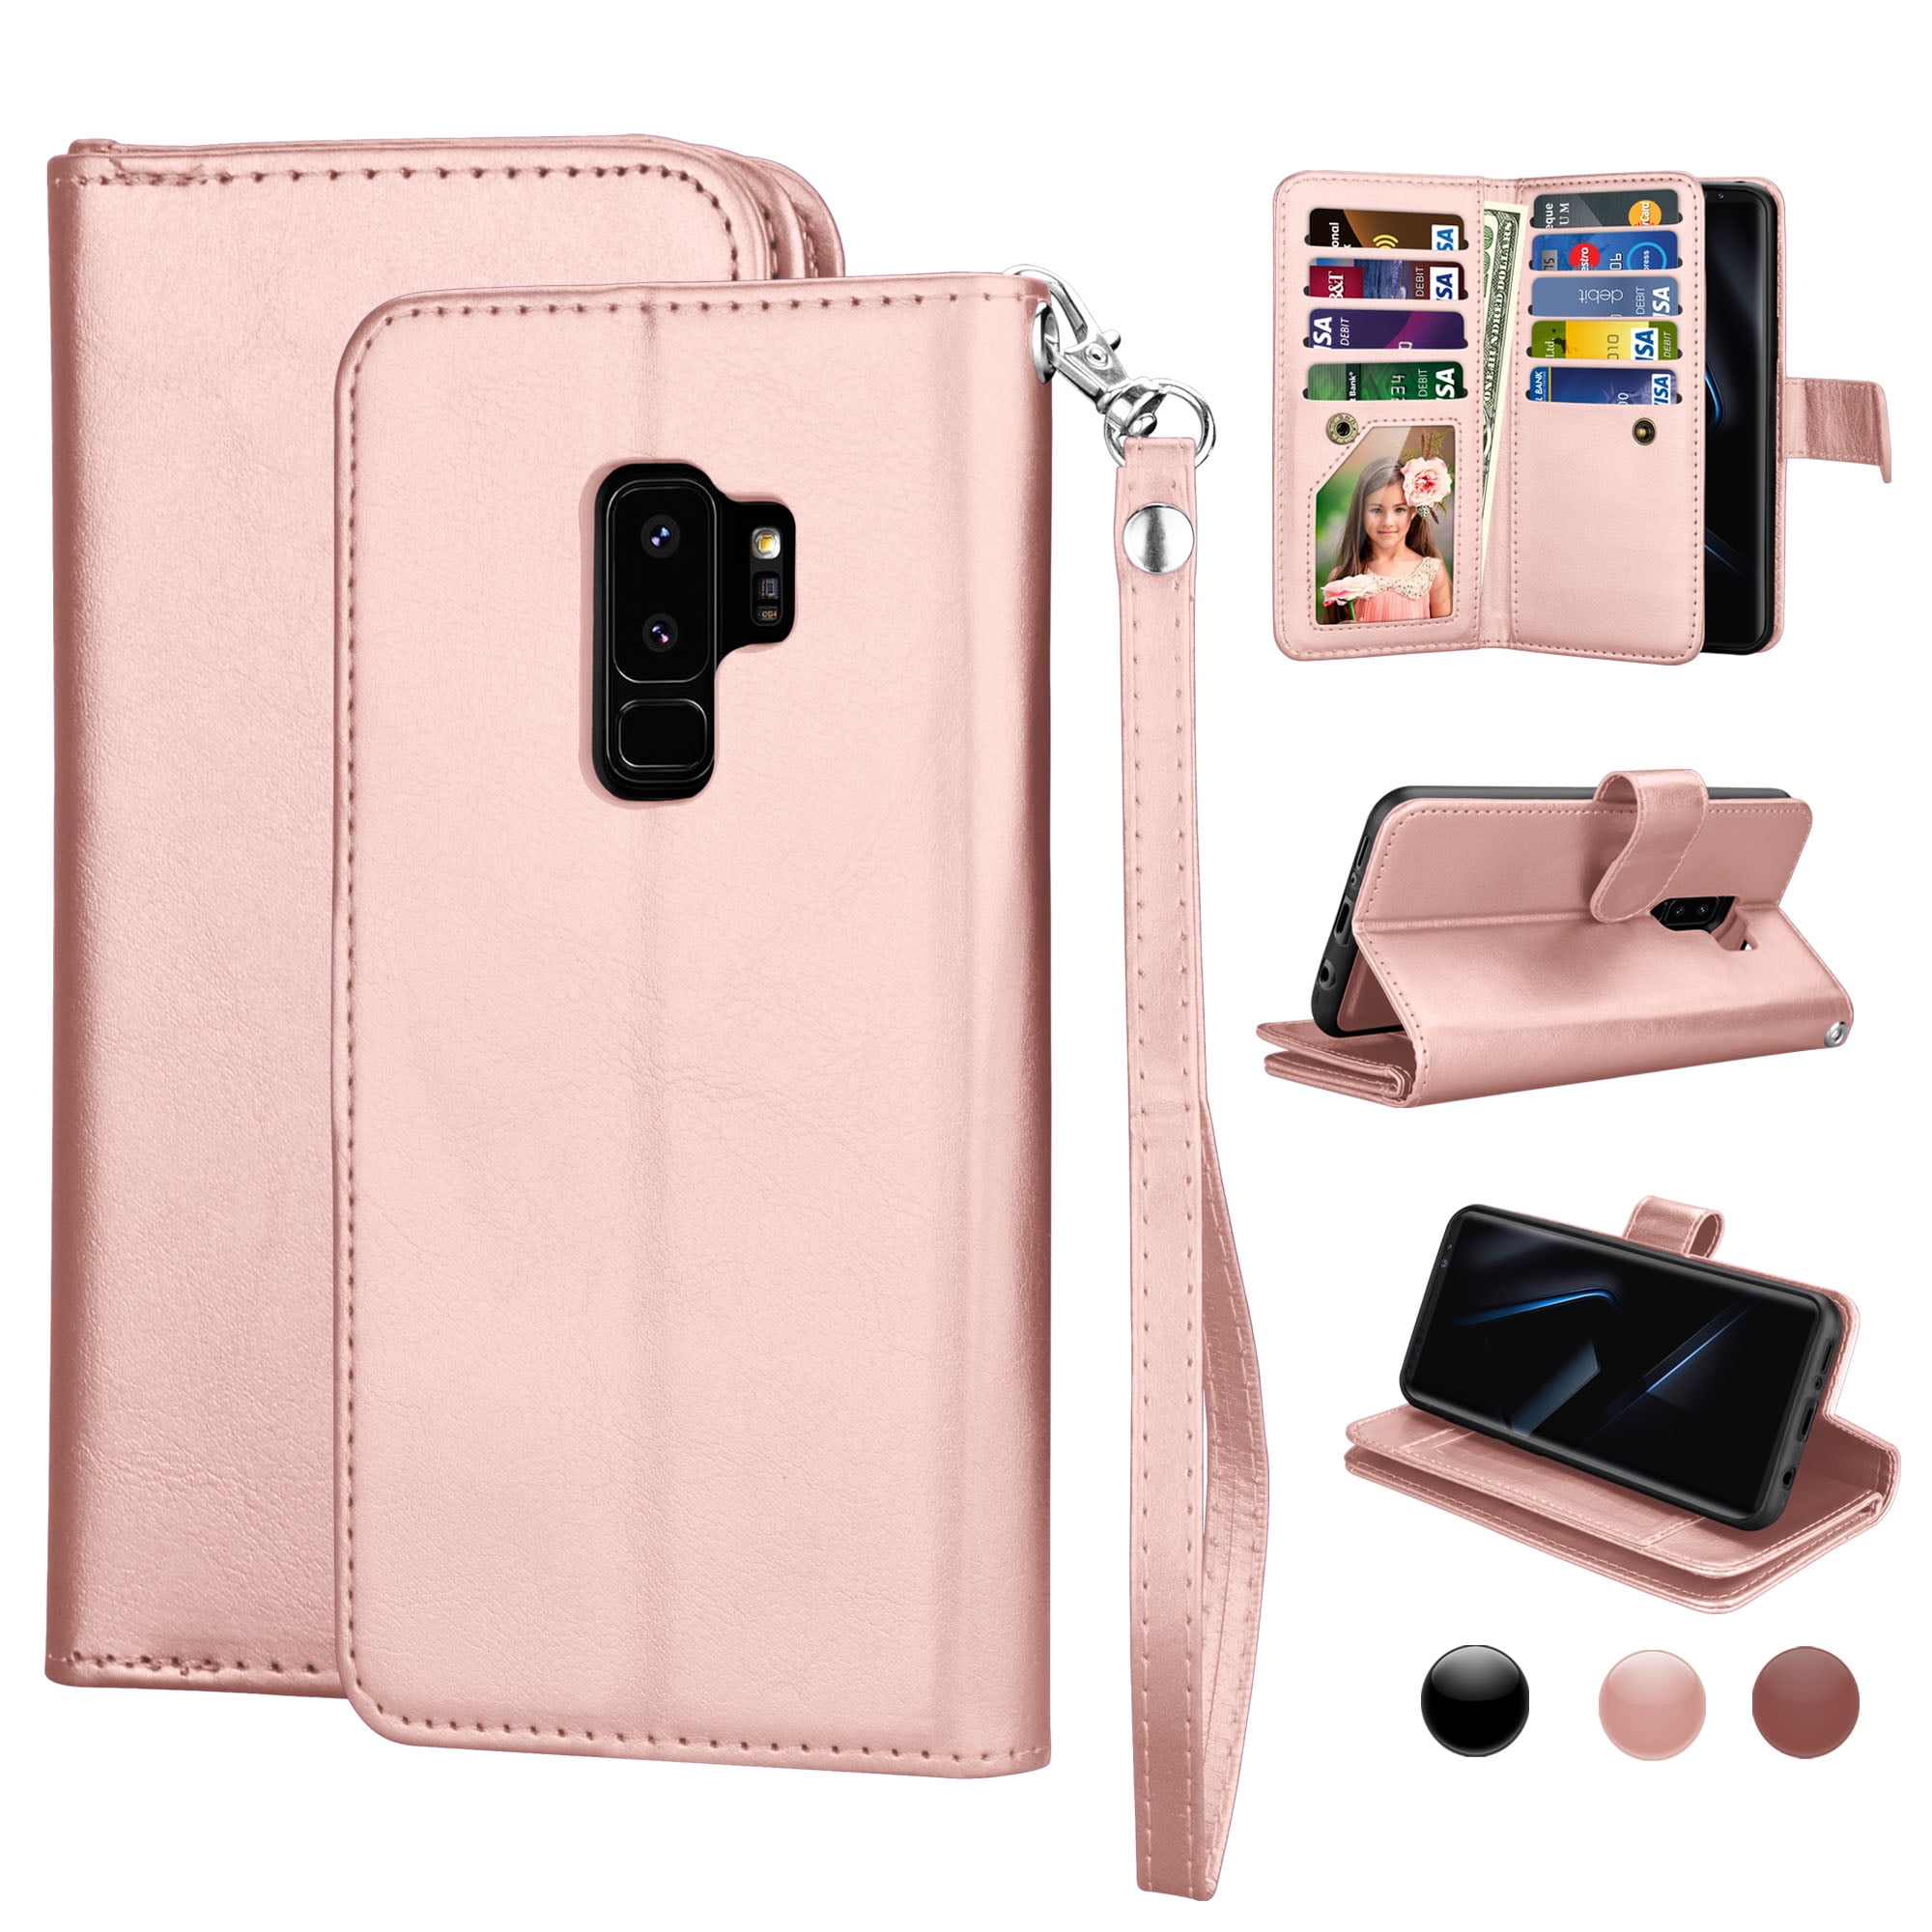 Galaxy S9 Plus Stand Case,Samsung Galaxy S9 Plus Wallet Case,Galaxy S9 Plus 2018 PU Leather Case,SKYMARS Cat Tree Embossed PU Leather Flip Kickstand Cards Slot Cash Pockets Wallet Magnetic Closure Book Style Shockproof Case for Samsung Galaxy S9 Plus 2018